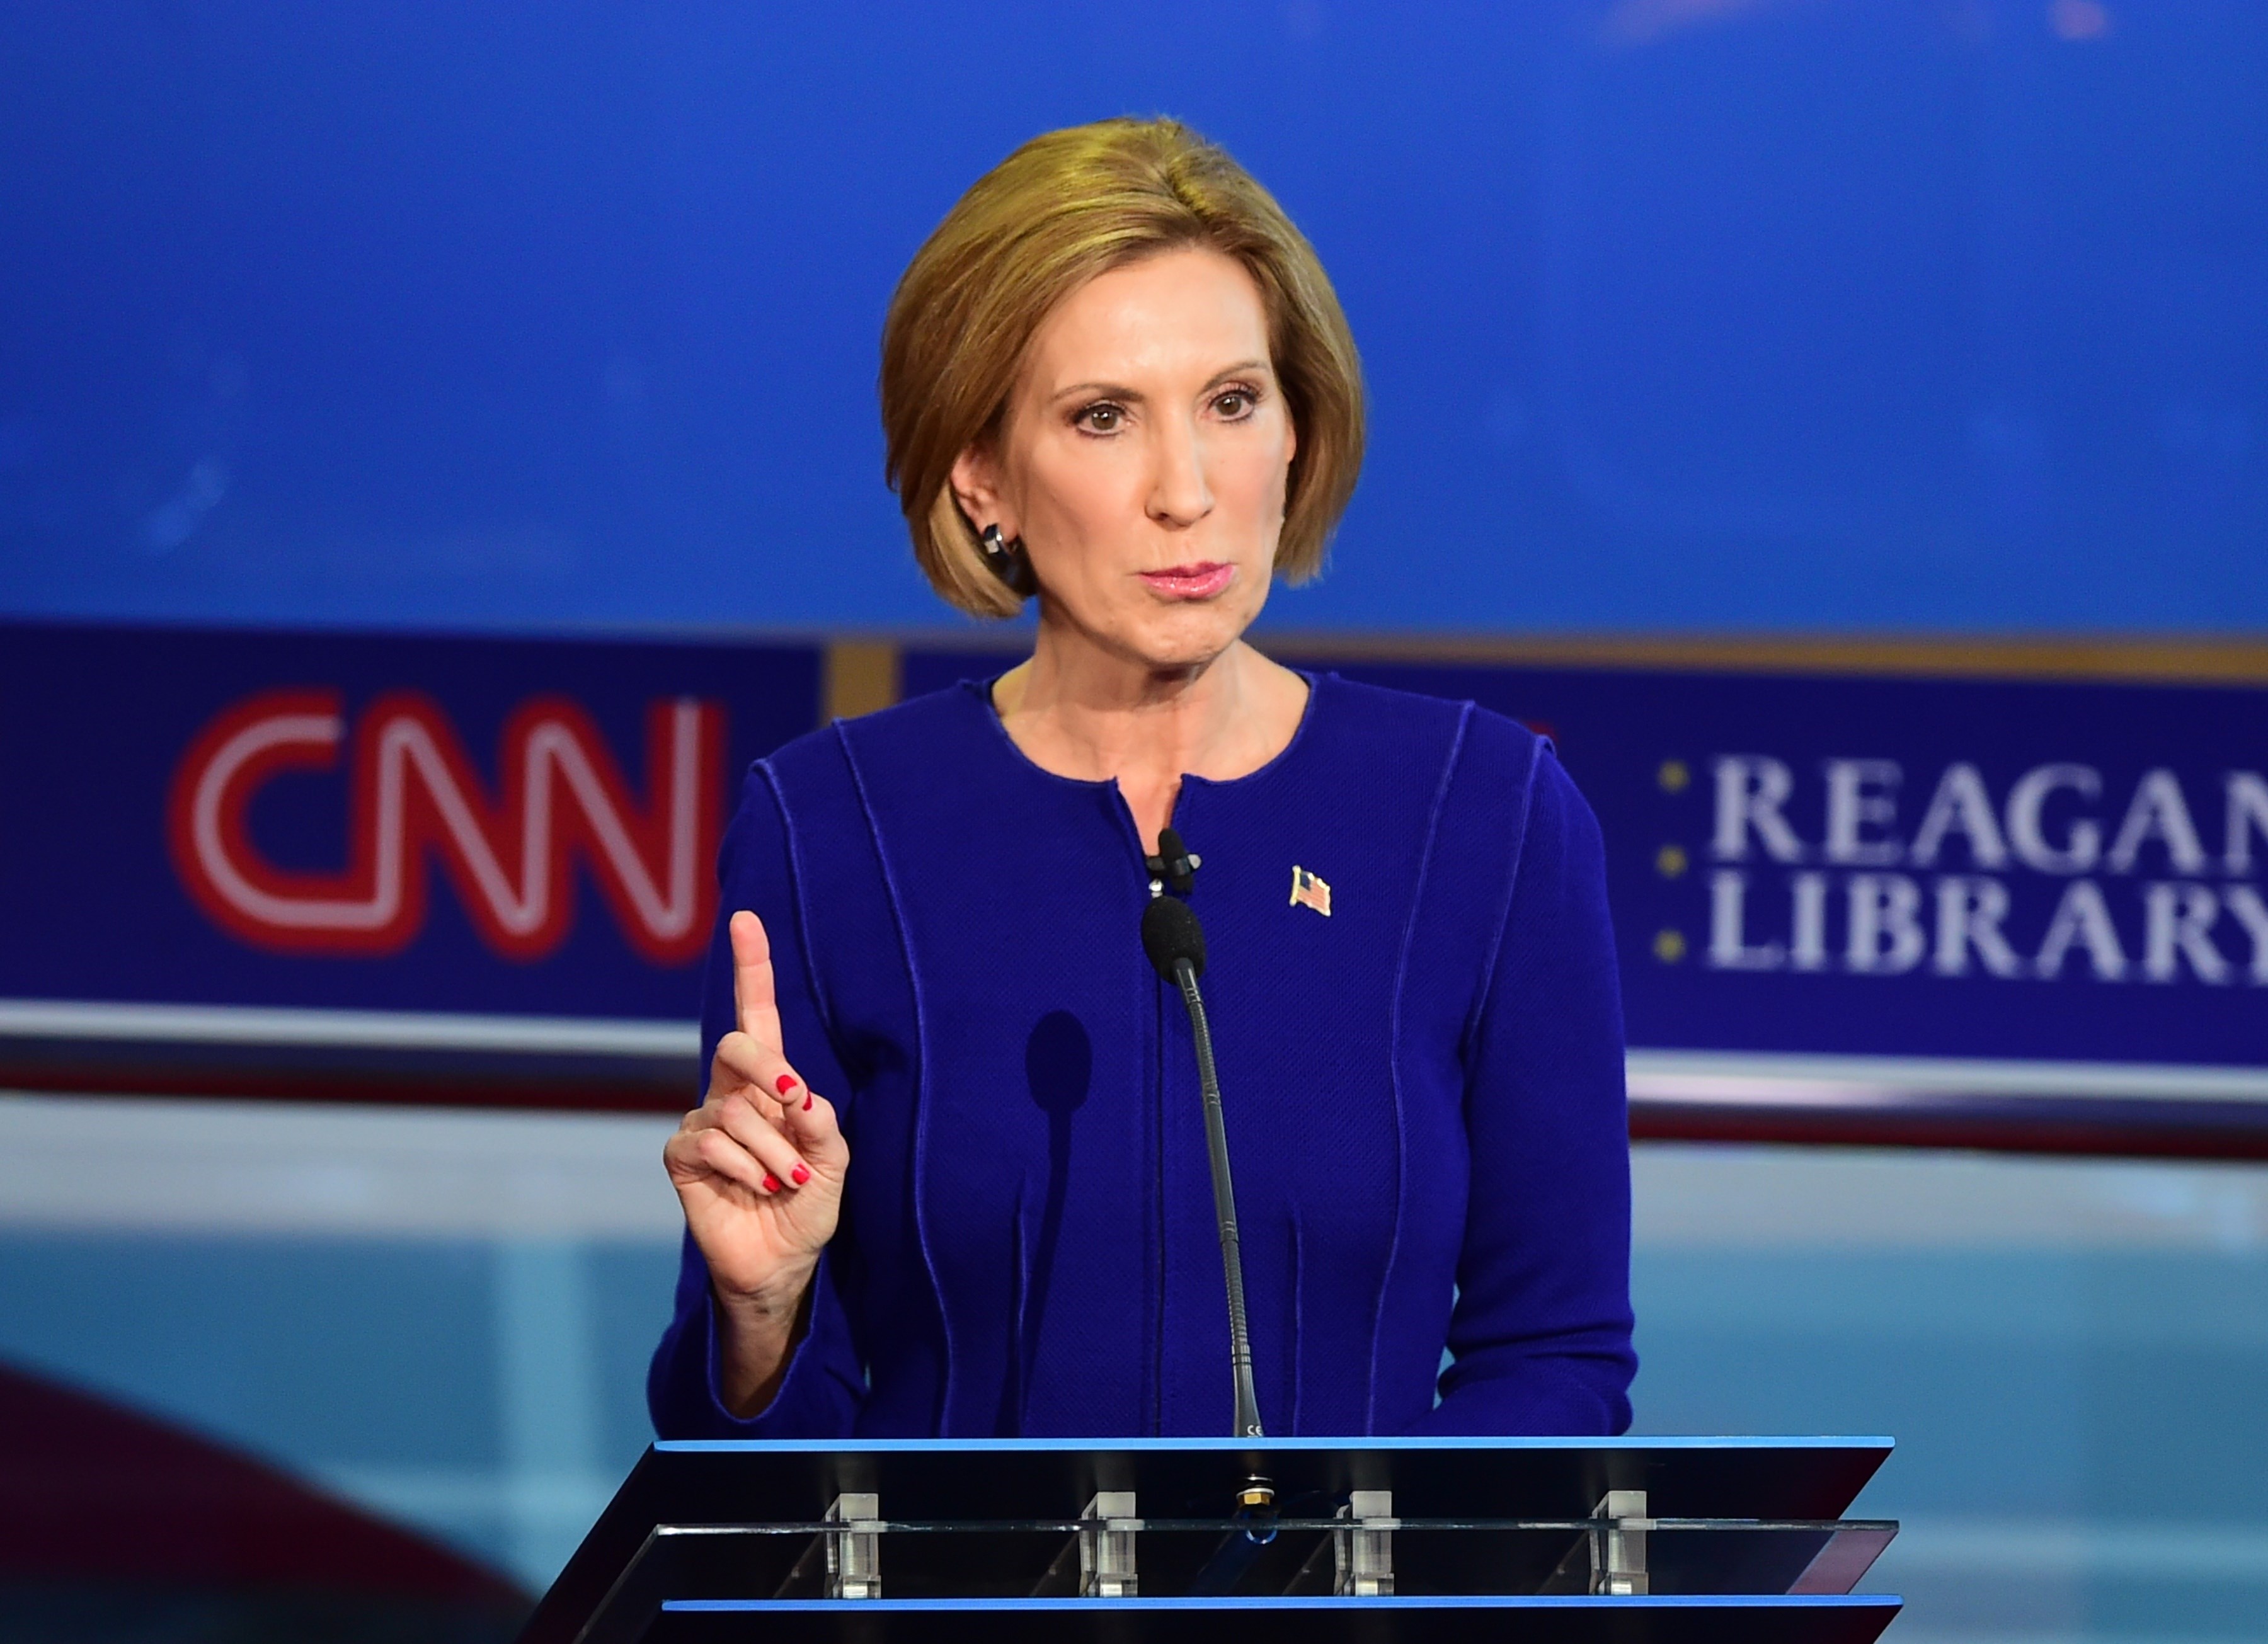 Republican presidential hopeful Carly Fiorina speaks during the Republican presidential debate at the Ronald Reagan Presidential Library in Simi Valley, California on Sept. 16, 2015. (Frederic Brown—AFP/Getty Images)